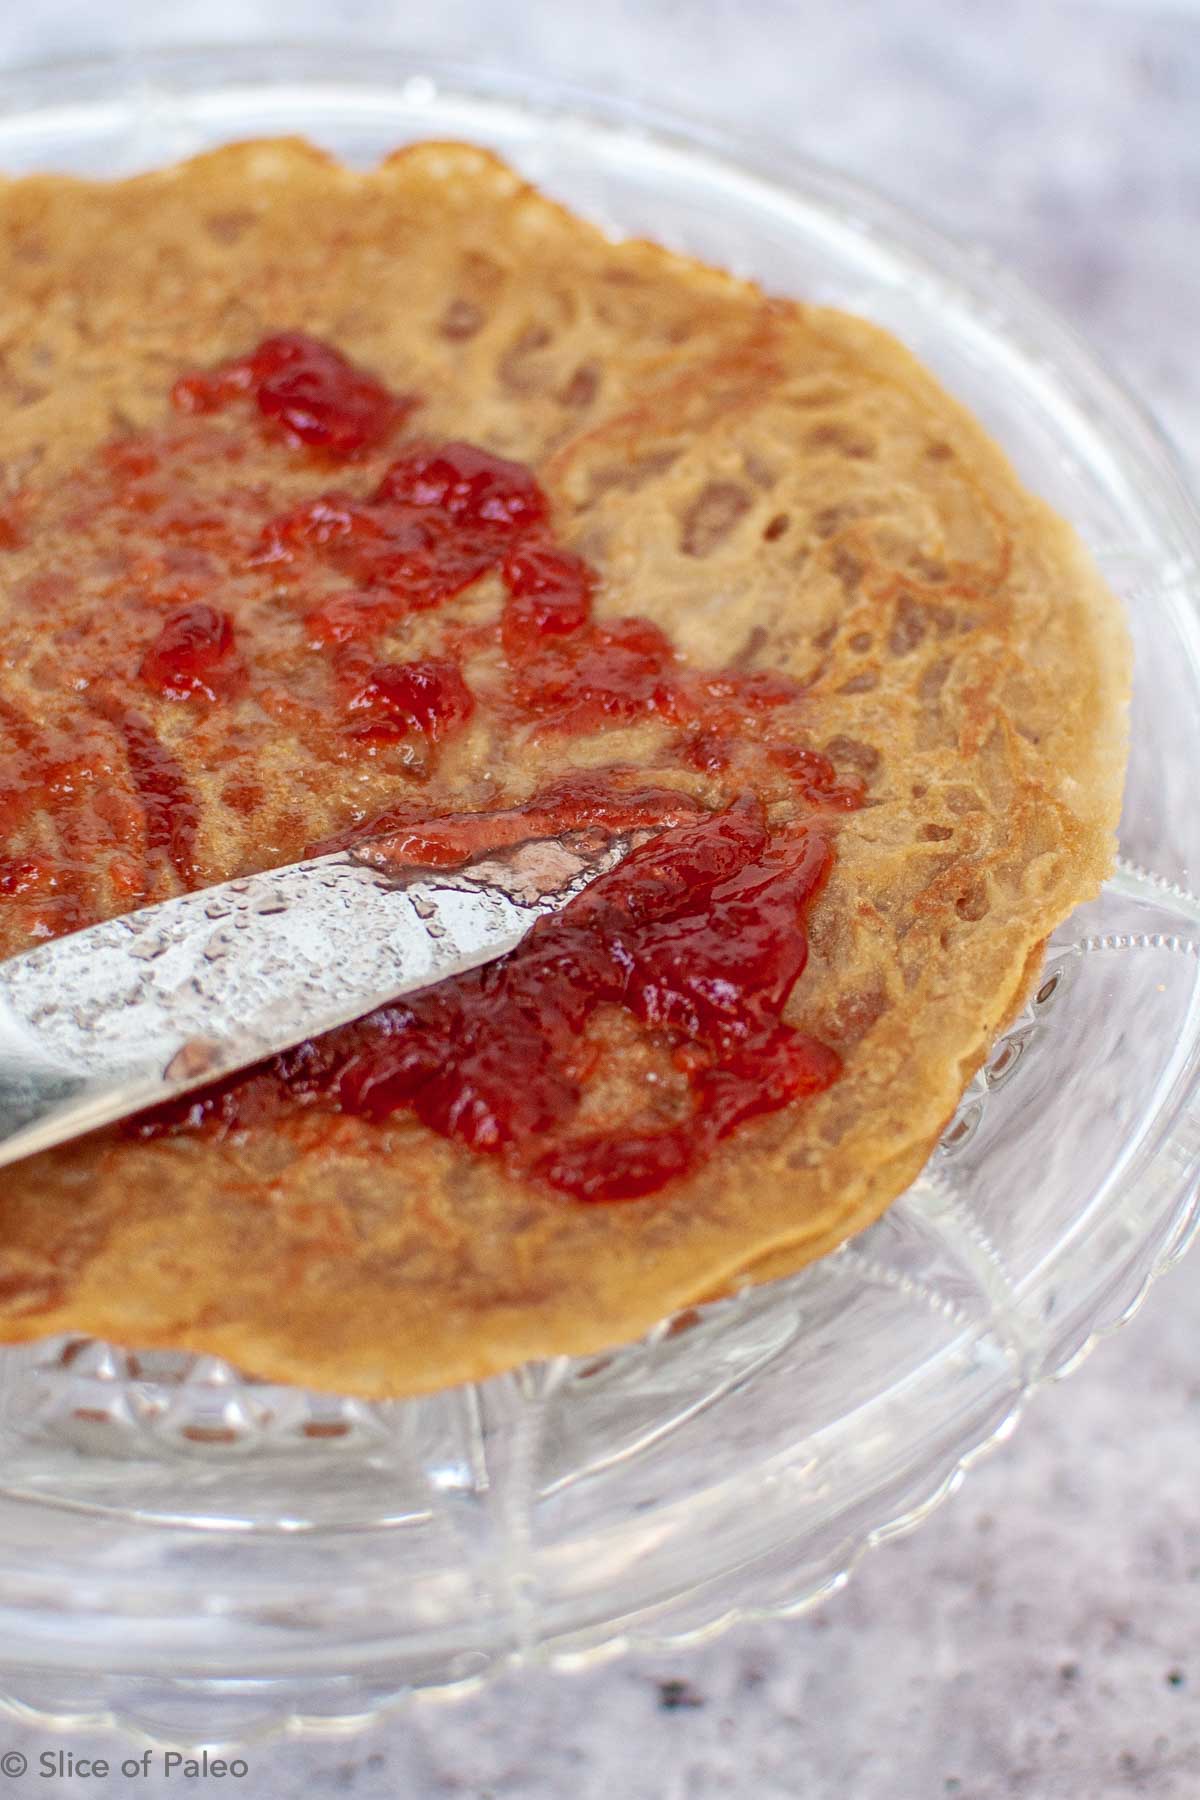 Putting together a Paleo Crepe Cake with jam